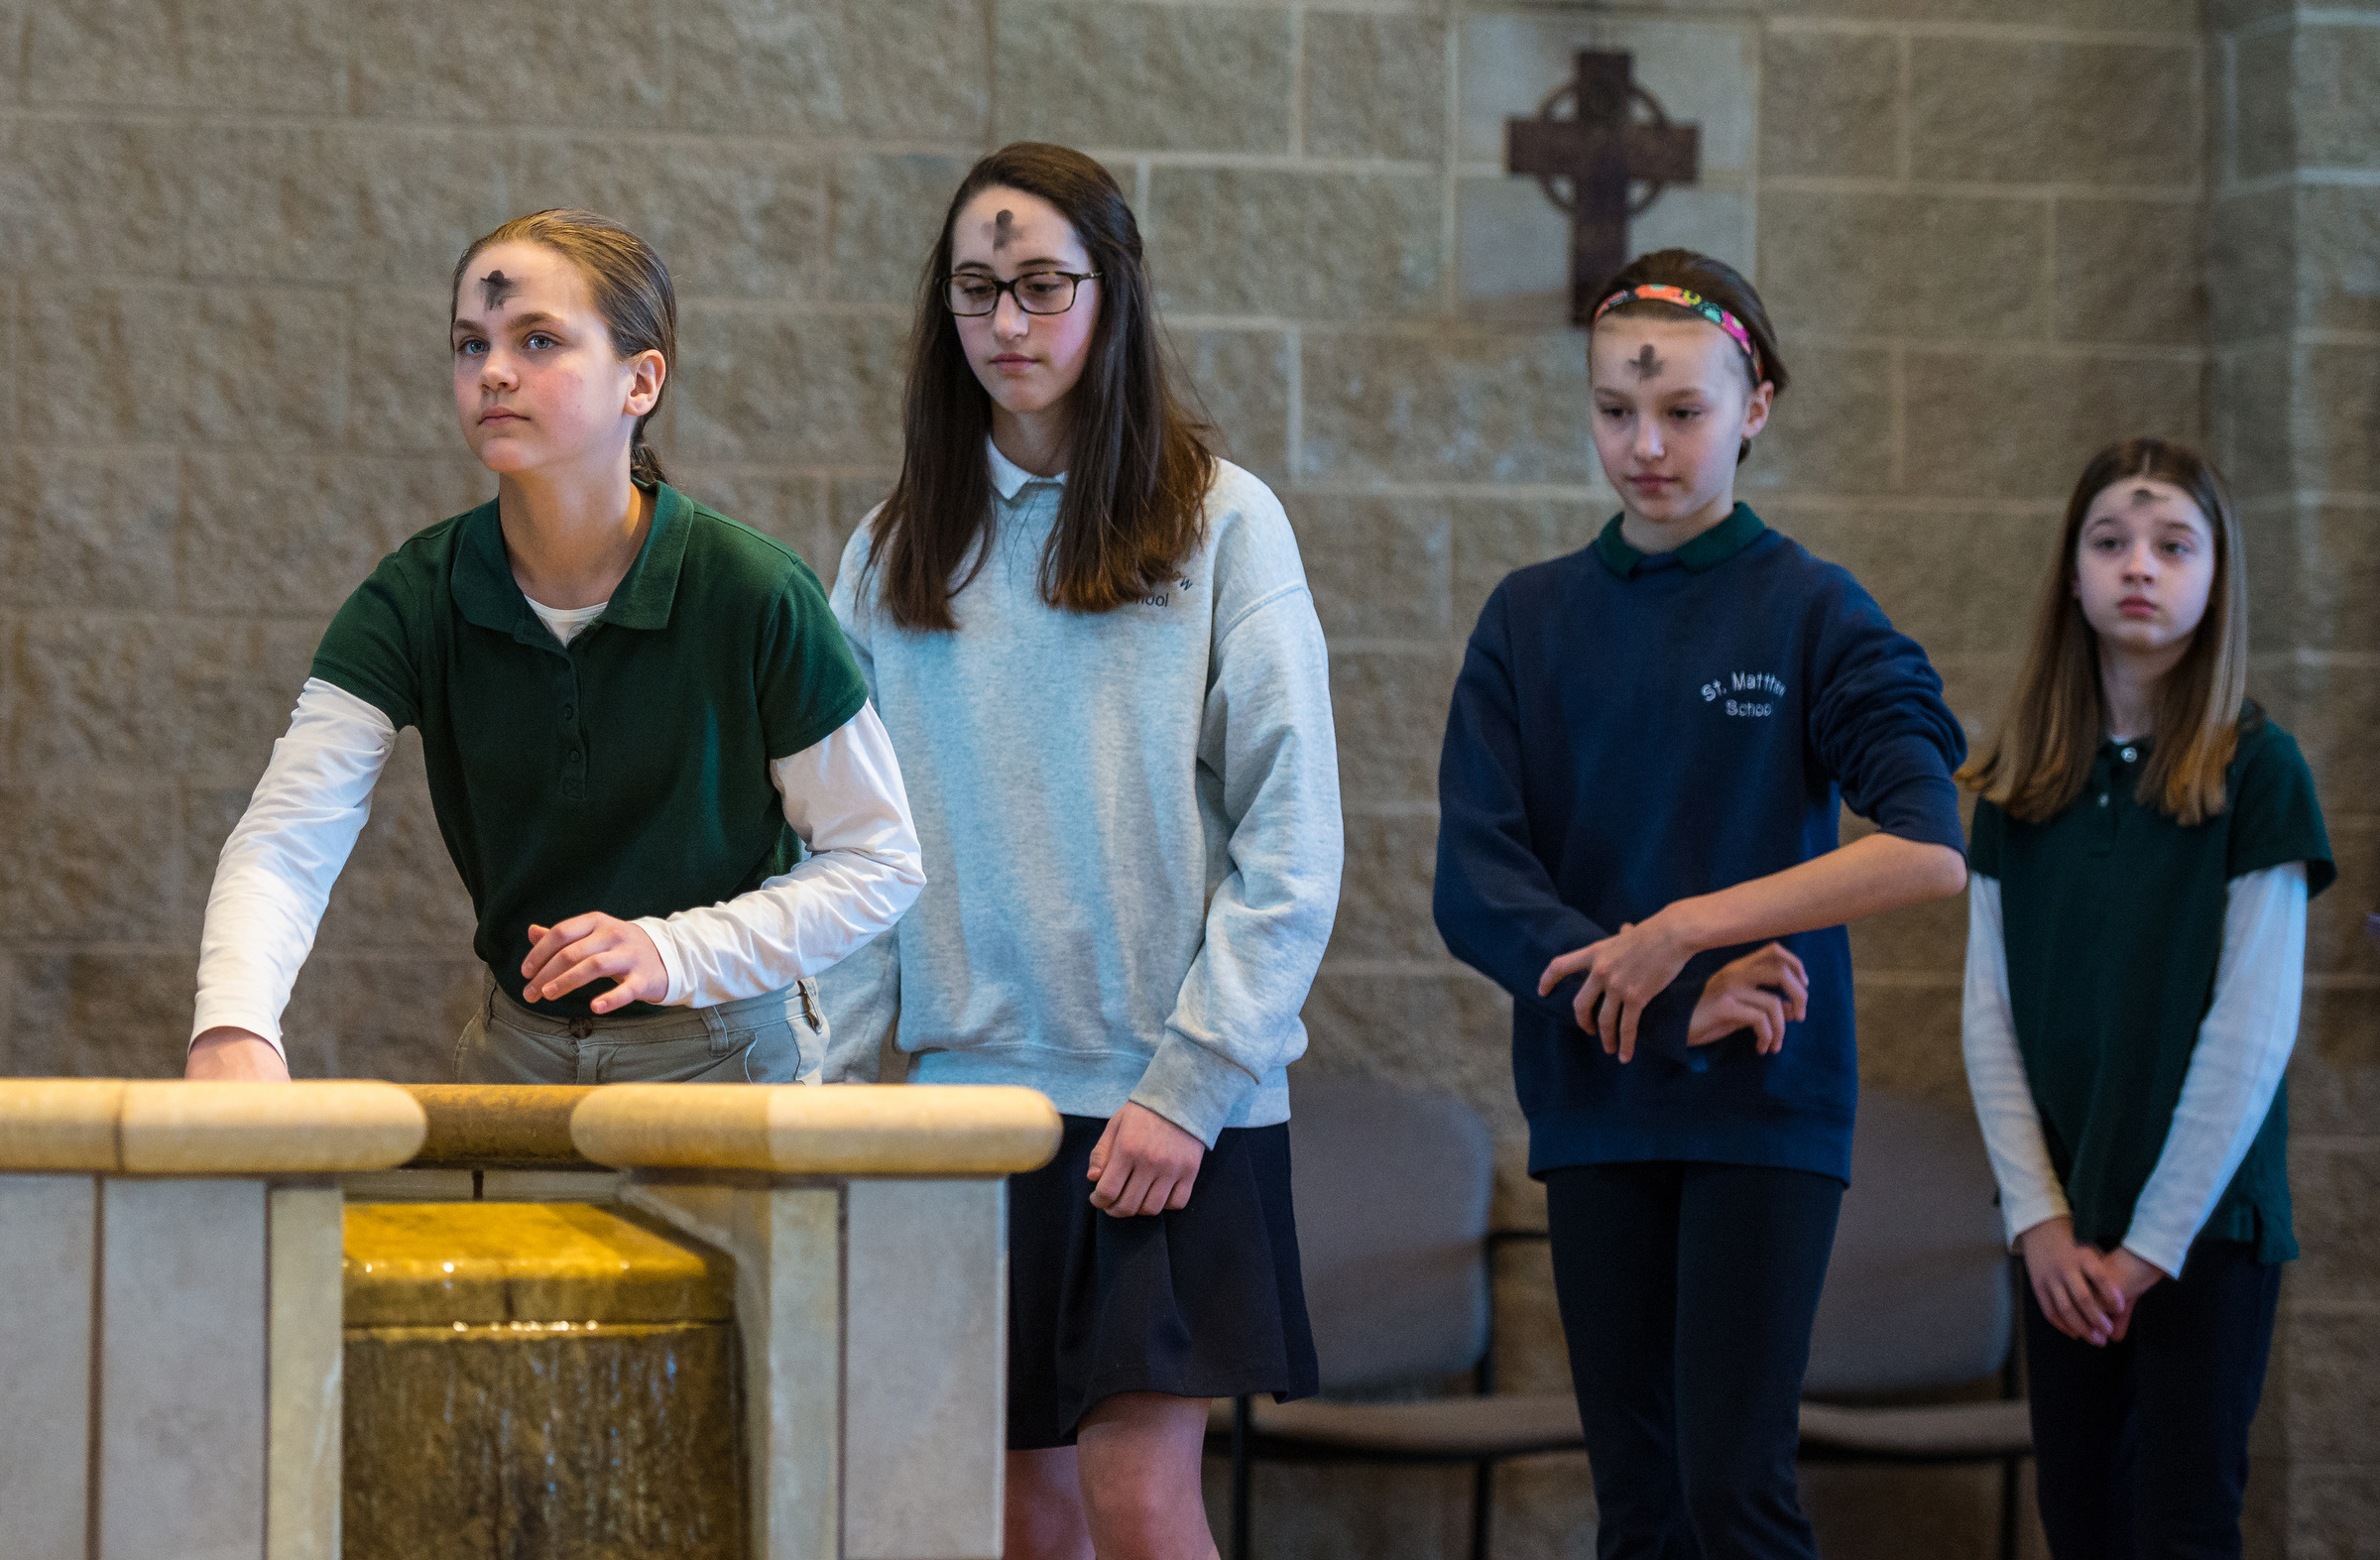 St. Matthew School students take turns to bless themselves with holy water as they exit St. Matthew Church in Allouez, Wis., following a Feb. 18 Ash Wednesday Mass. (CNS/The Compass/Sam Lucero)